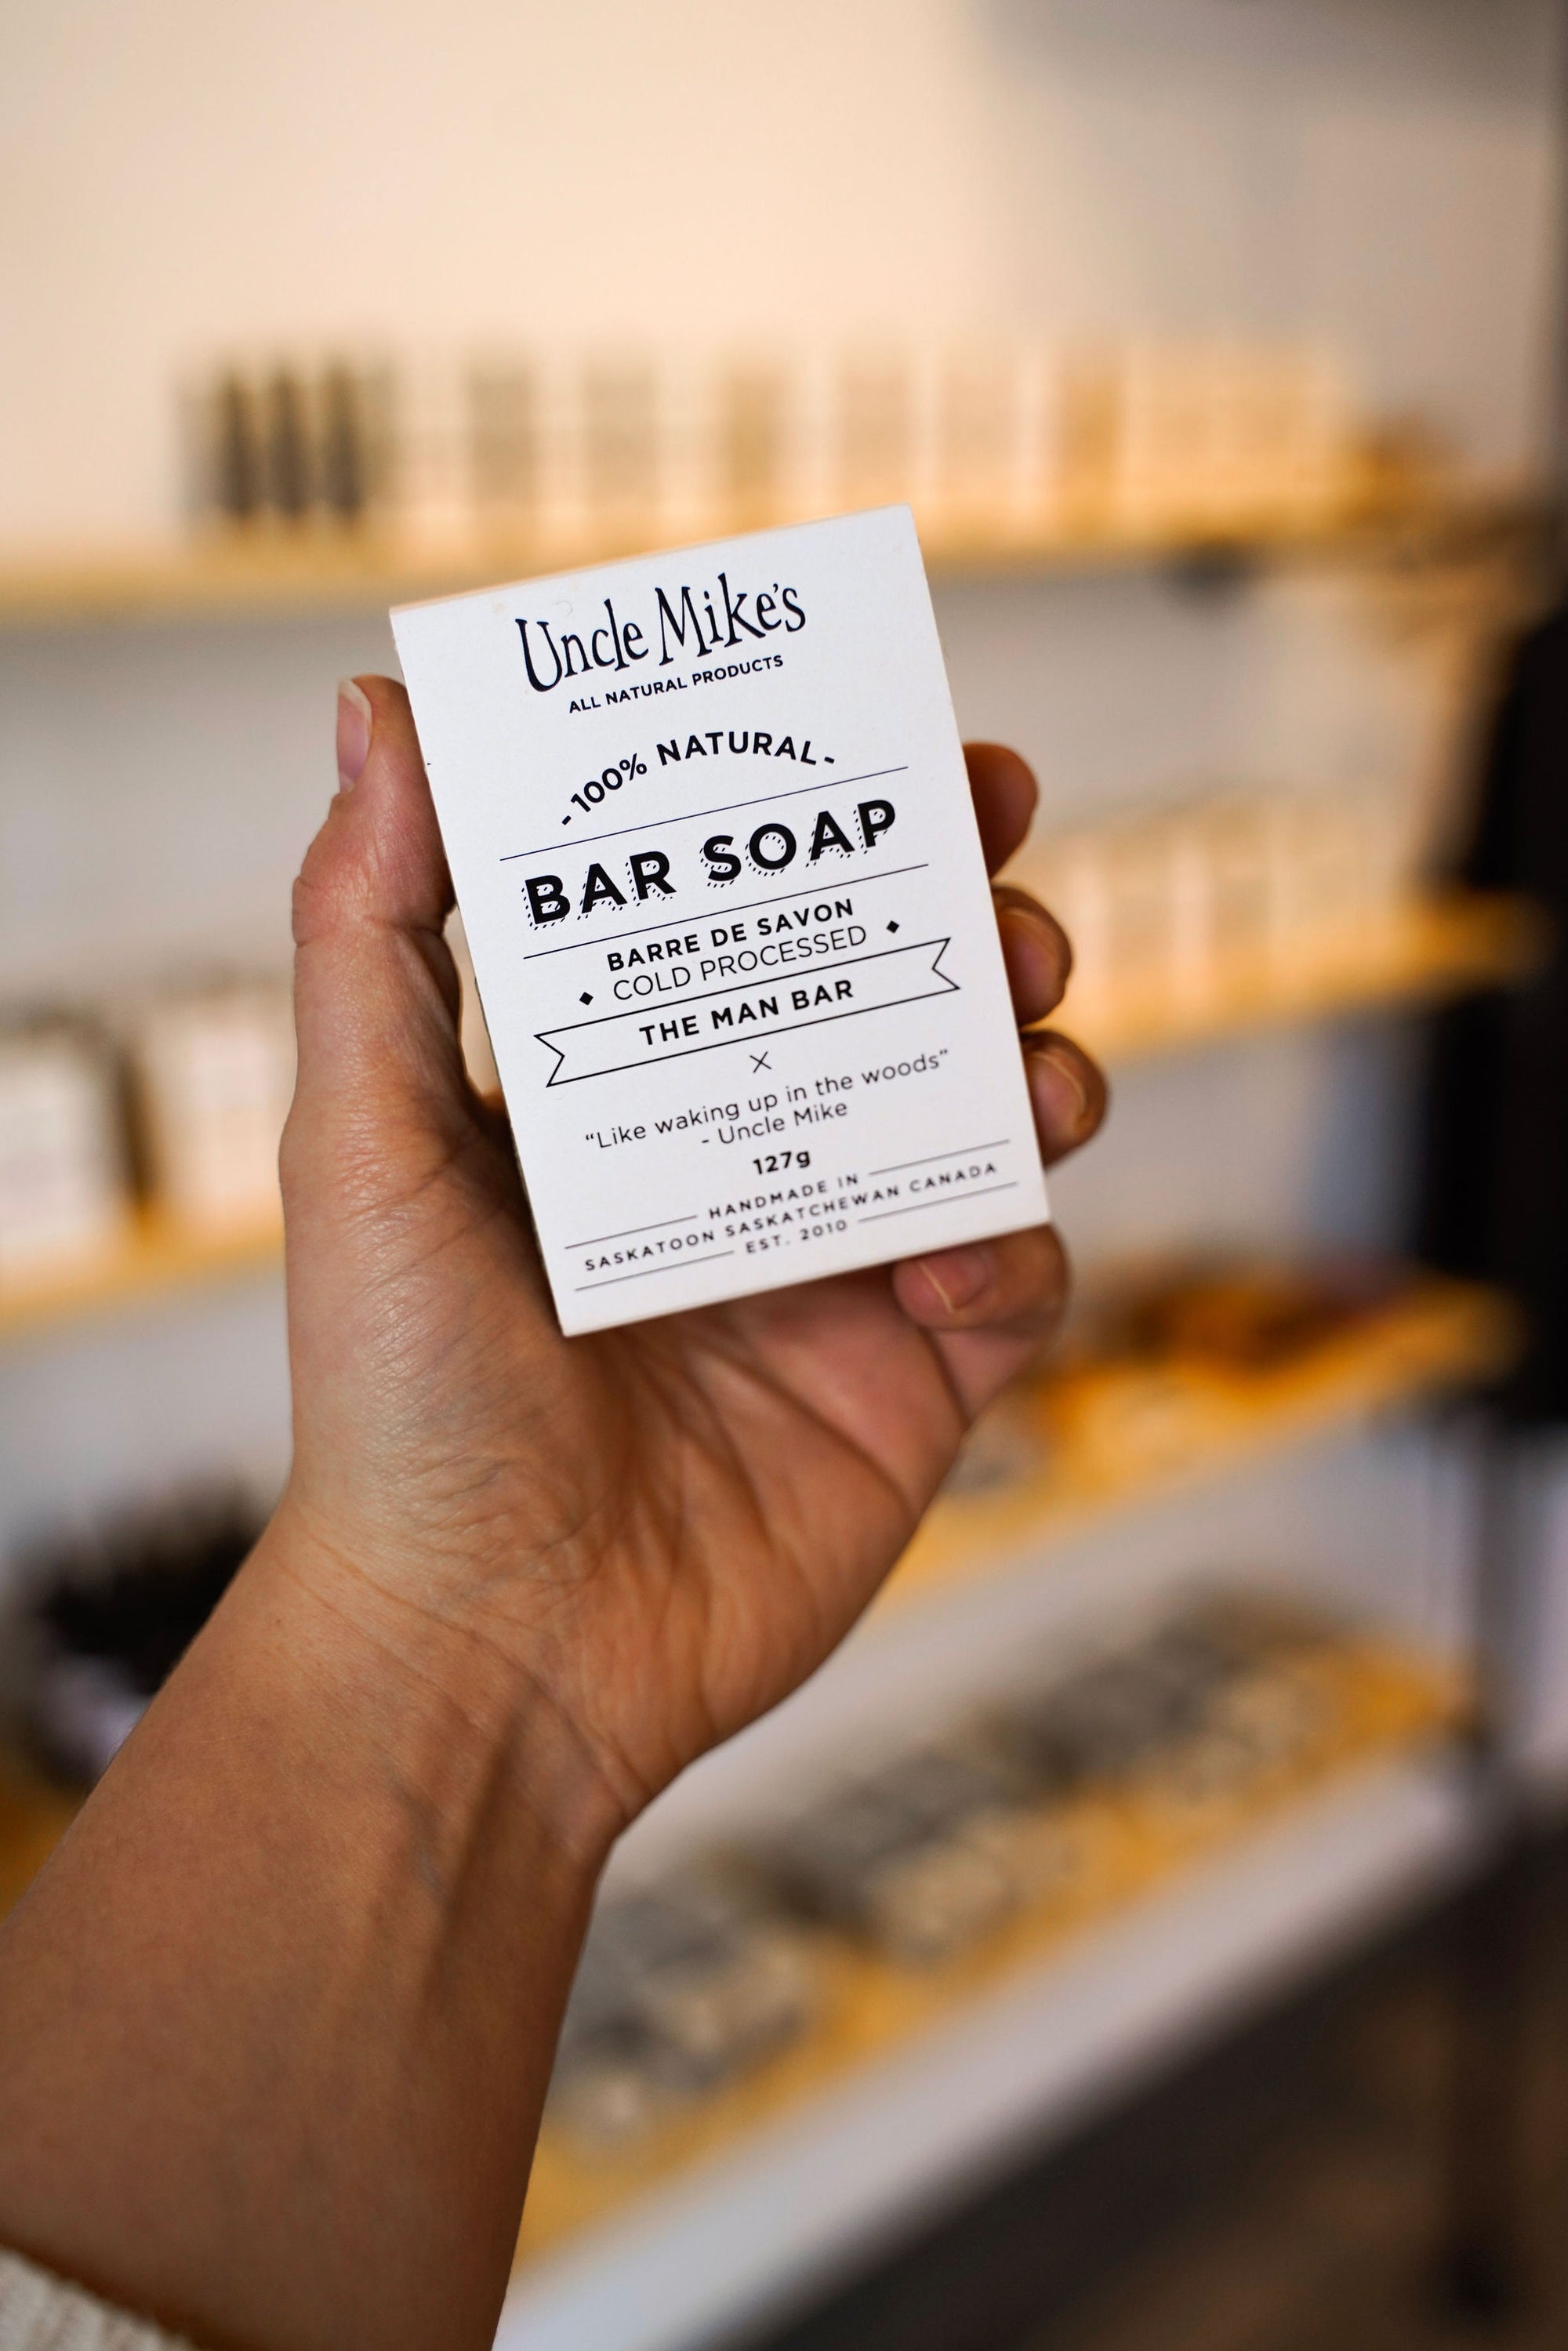 Discover the Top 6 Benefits of Uncle Mike's Natural Soap